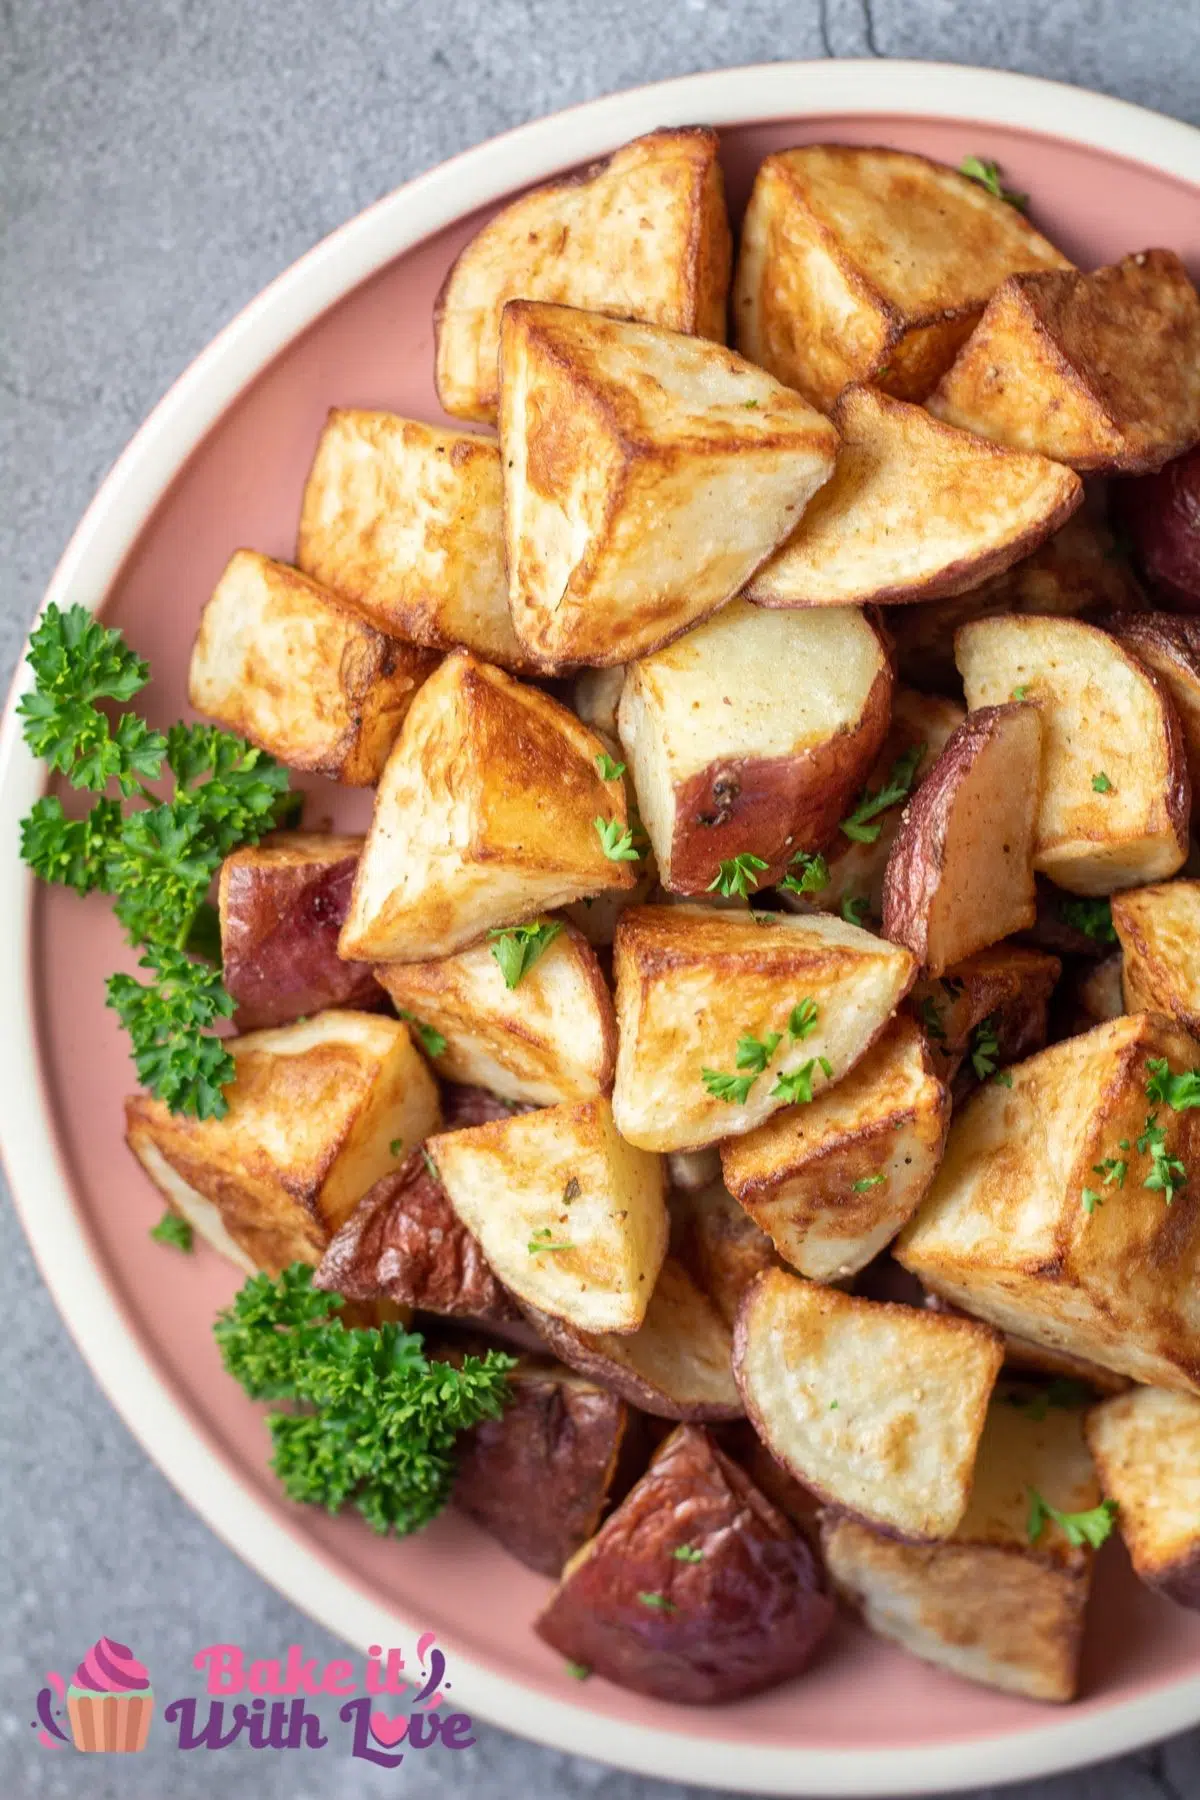 Tall overhead of the plated crispy roasted red potatoes with parsley garnish on dusty rose colored plate.